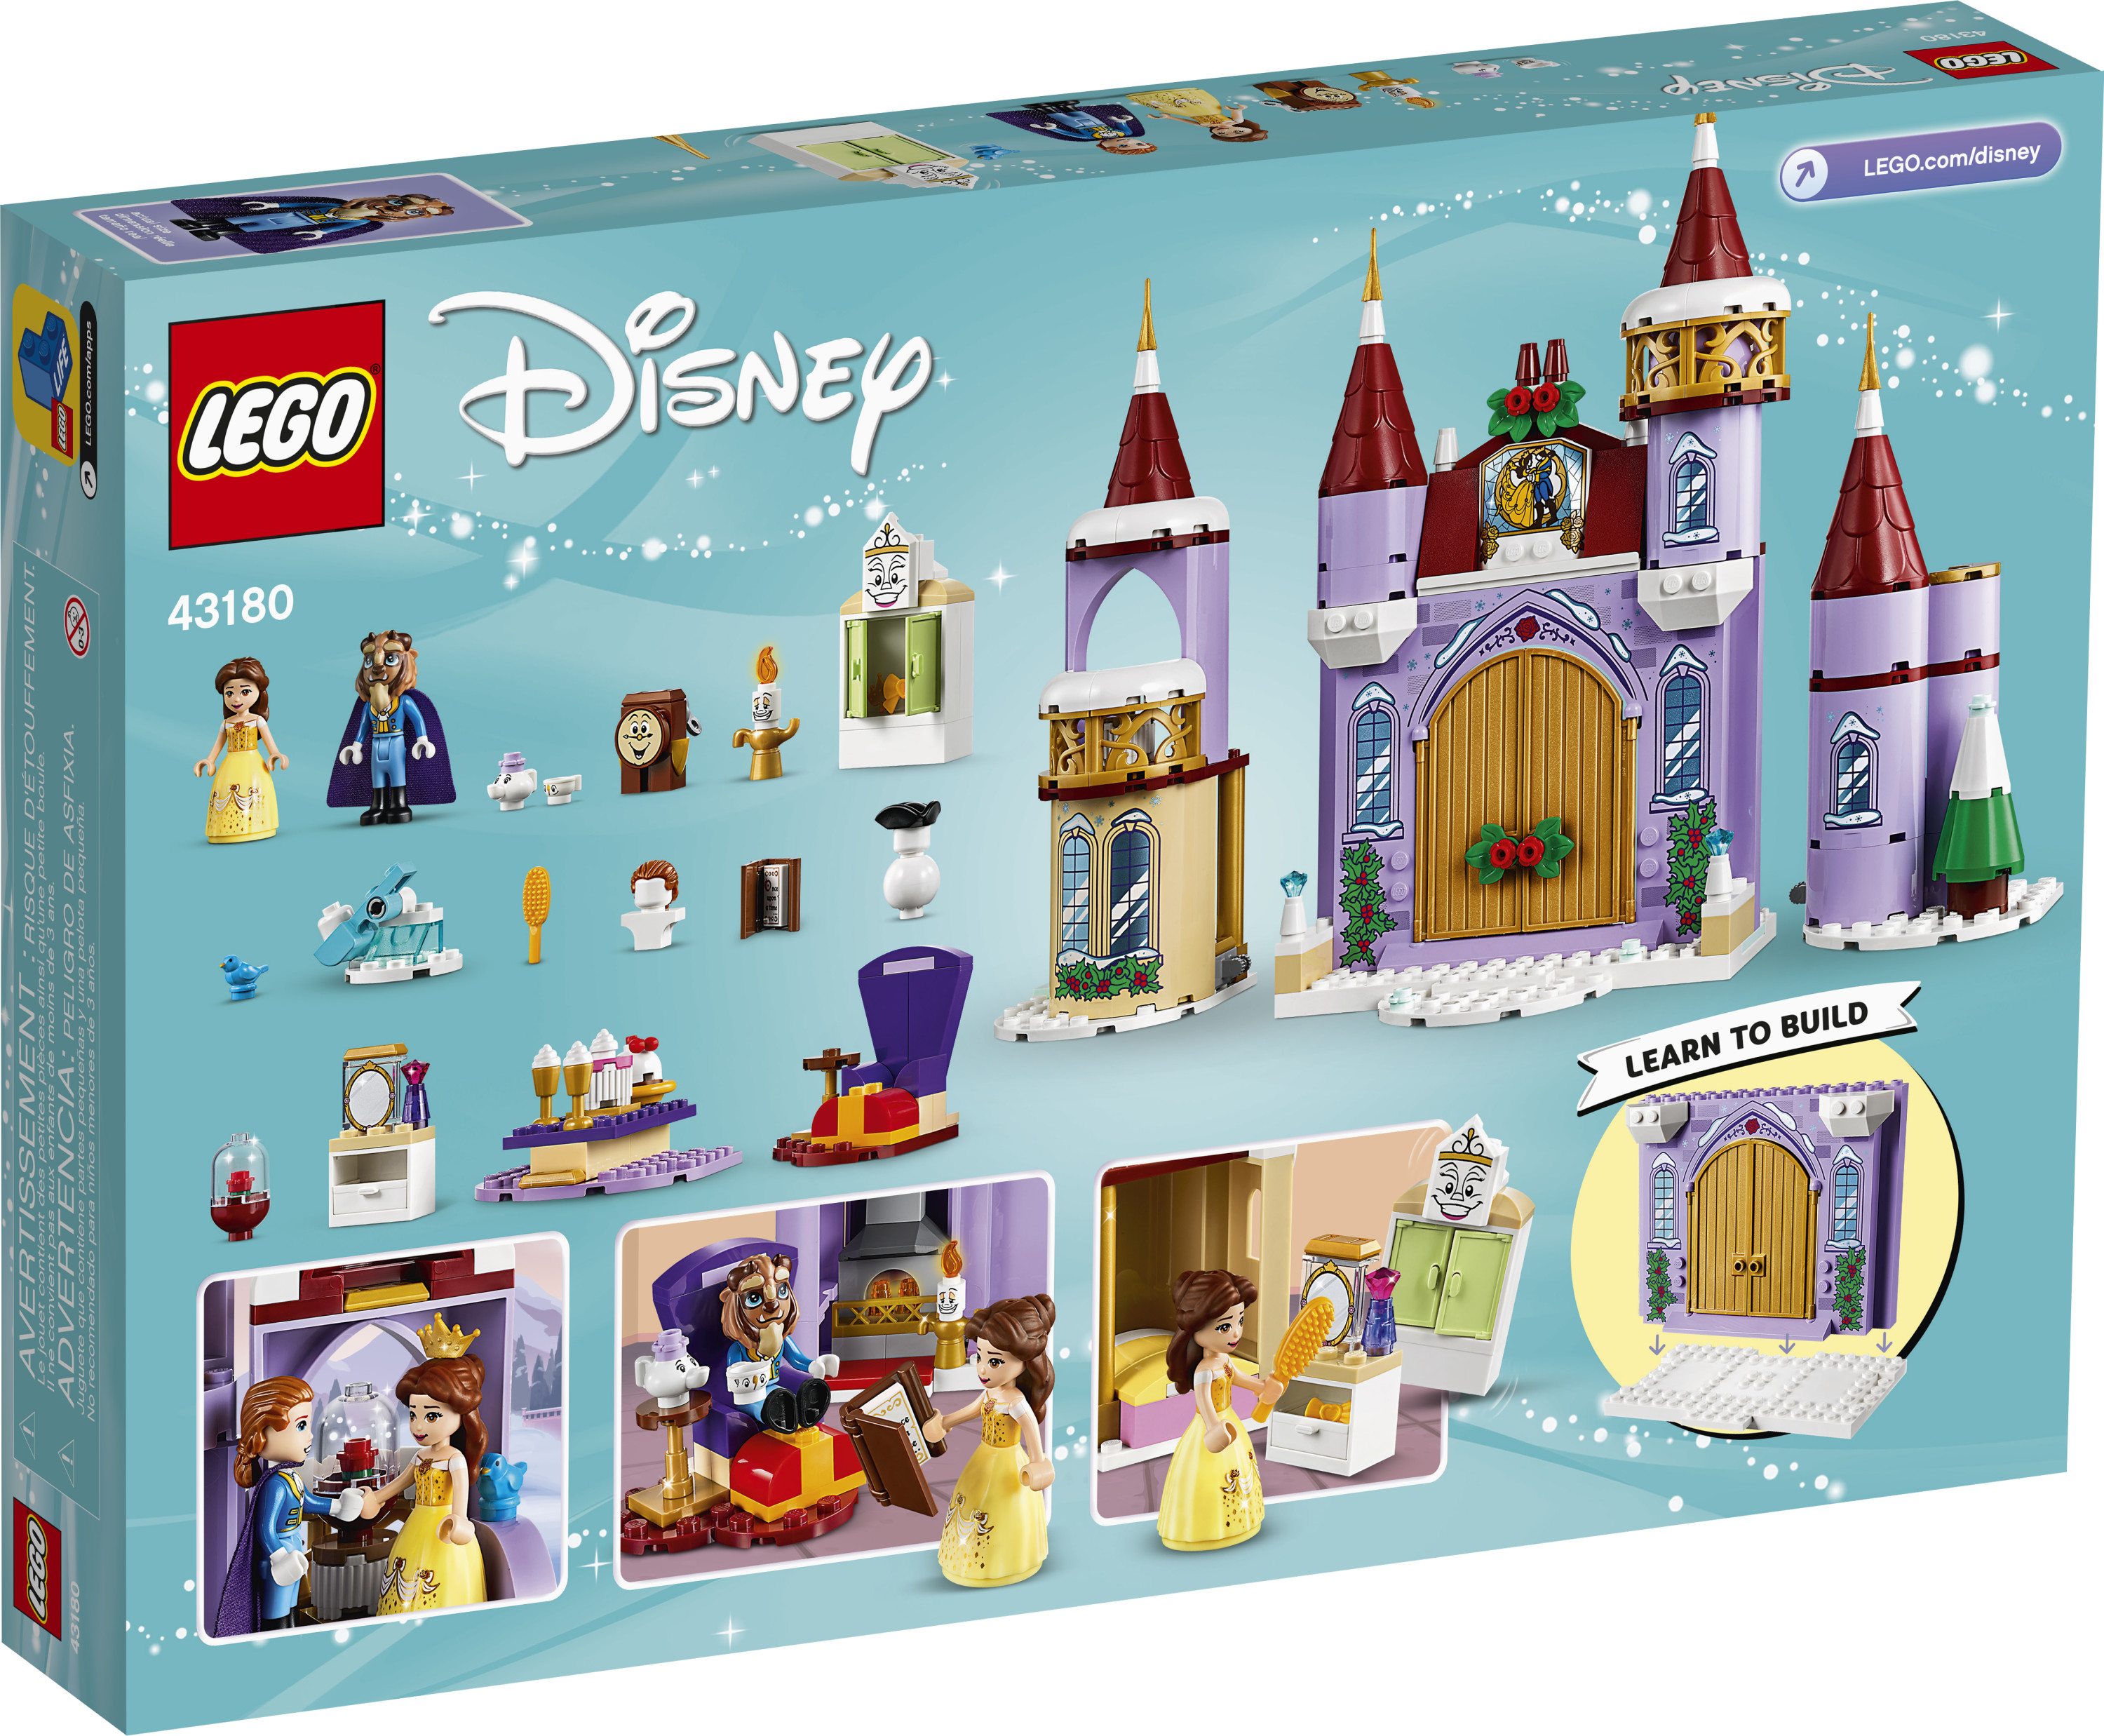 LEGO Disney Princess Series - Beauty and the Beast - Belle's Castle Winter Celebration 43180 - image 6 of 8